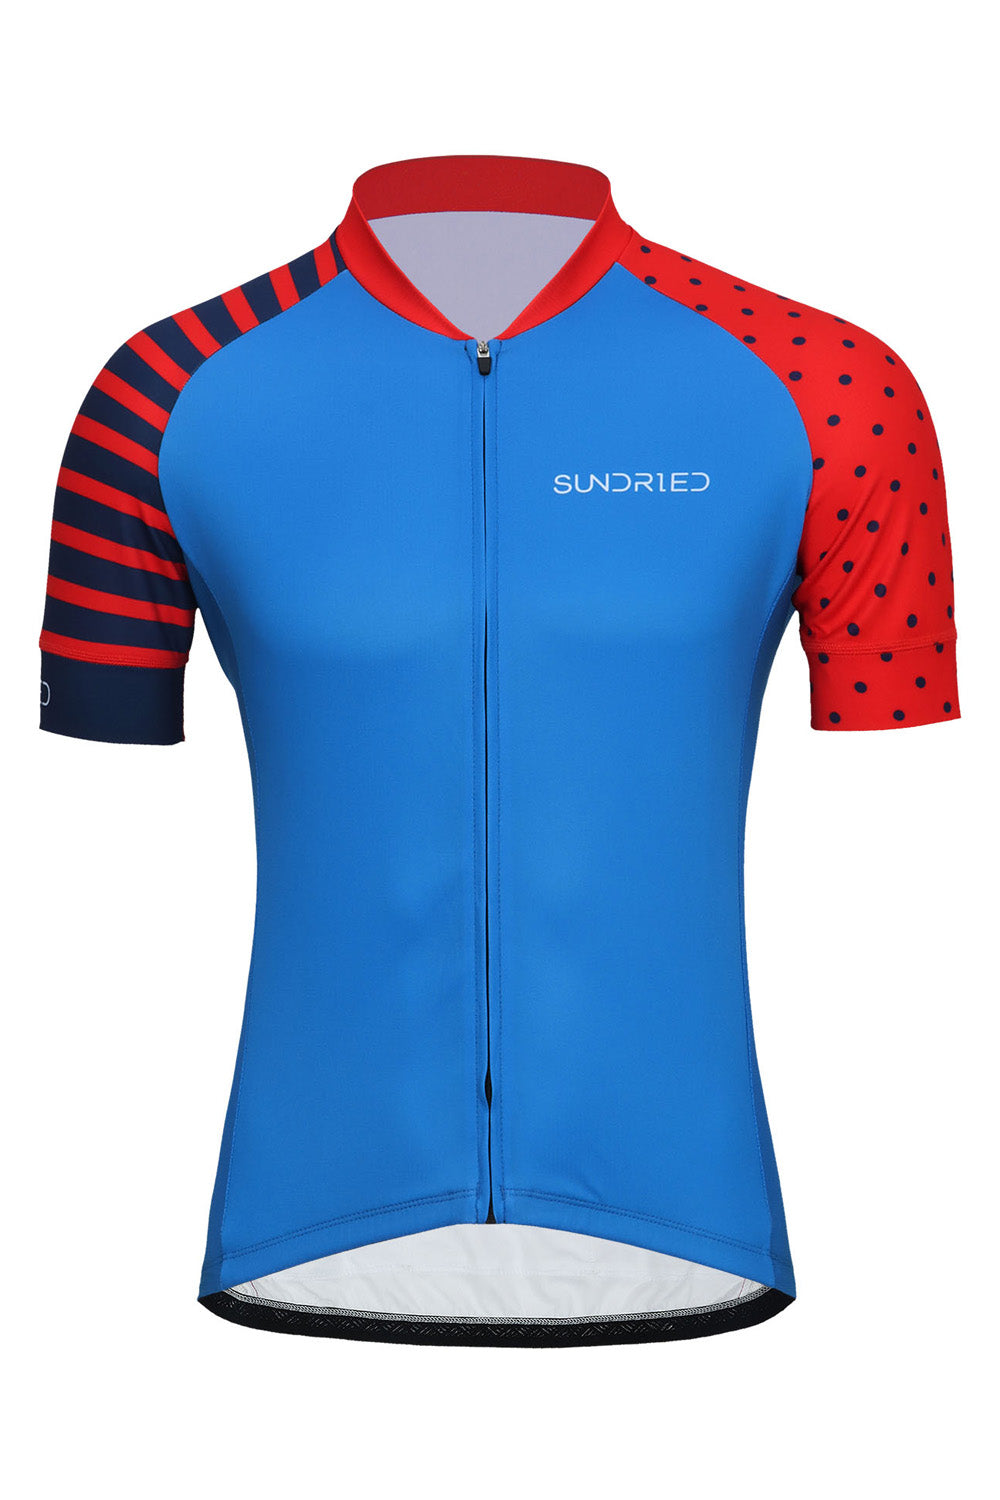 Sundried Spots and Stripes Men's Short Sleeve Cycle Jersey Cycling Kit